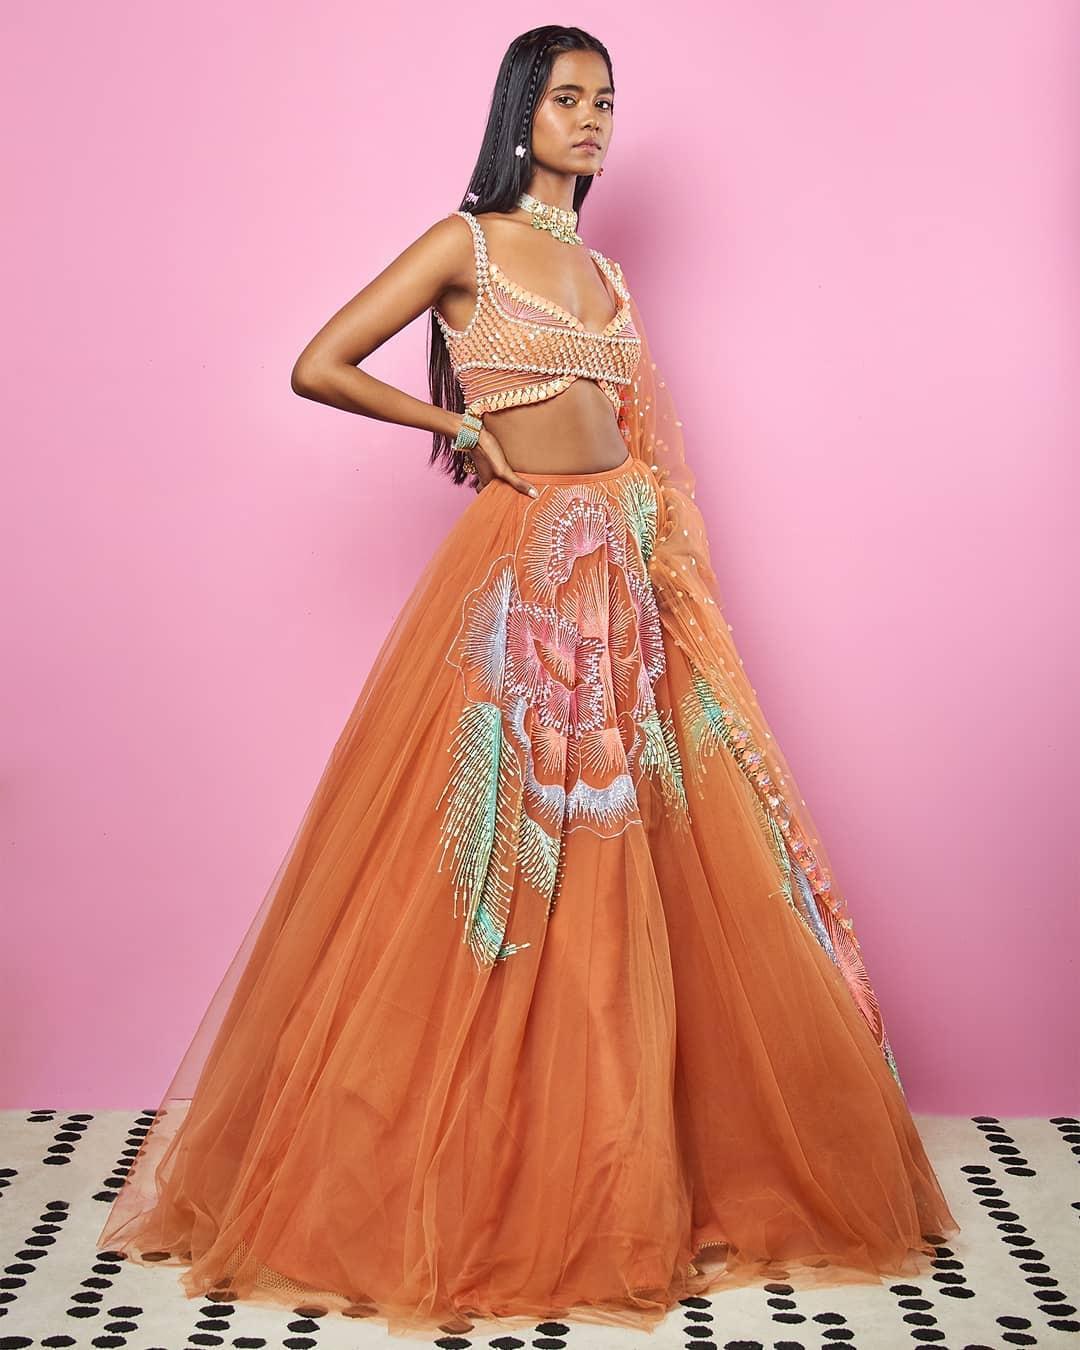 30 Trendy Sangeet Outfit Ideas for the Bride || What to wear at your sangeet  ceremony | Indian fashion dresses, Sangeet outfit, Indian gowns dresses